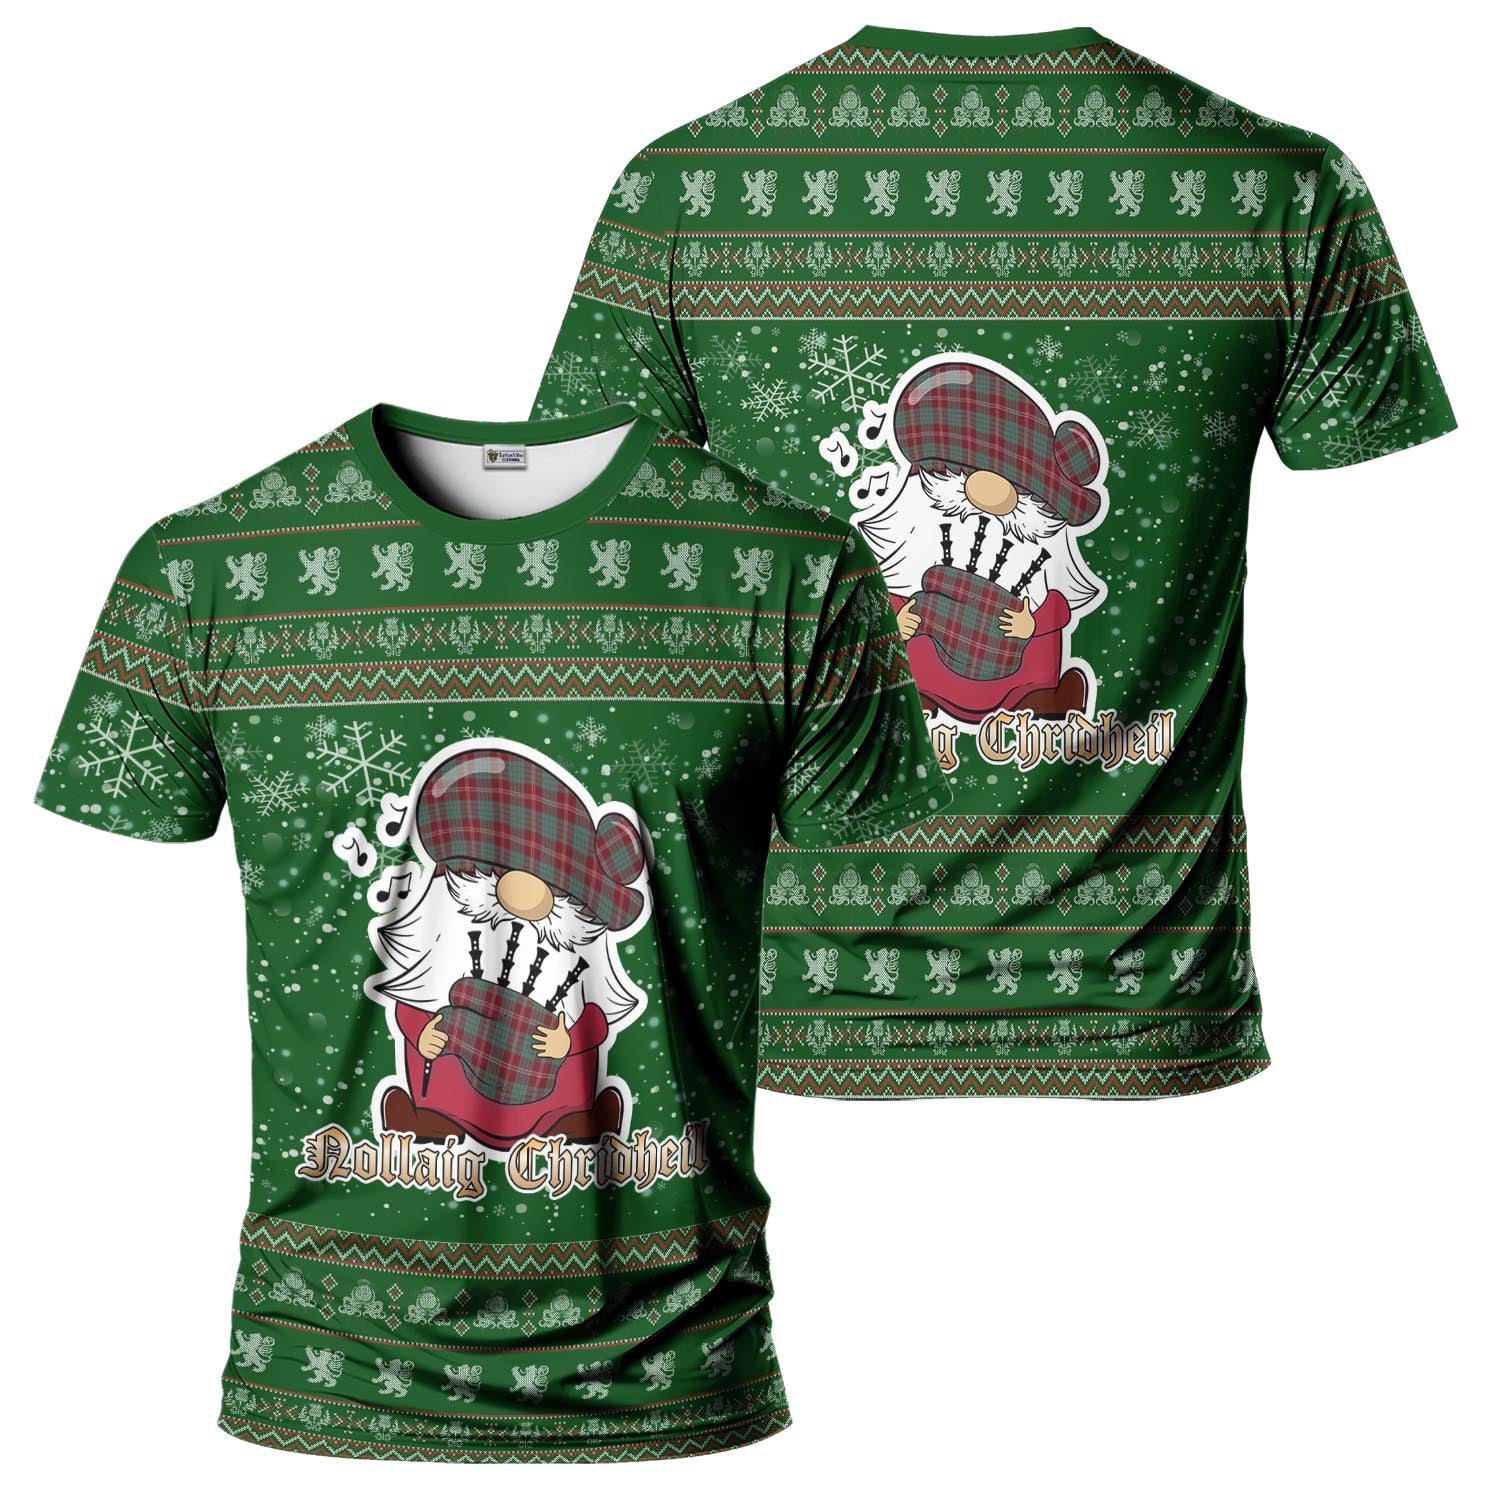 Crawford Modern Clan Christmas Family T-Shirt with Funny Gnome Playing Bagpipes Men's Shirt Green - Tartanvibesclothing